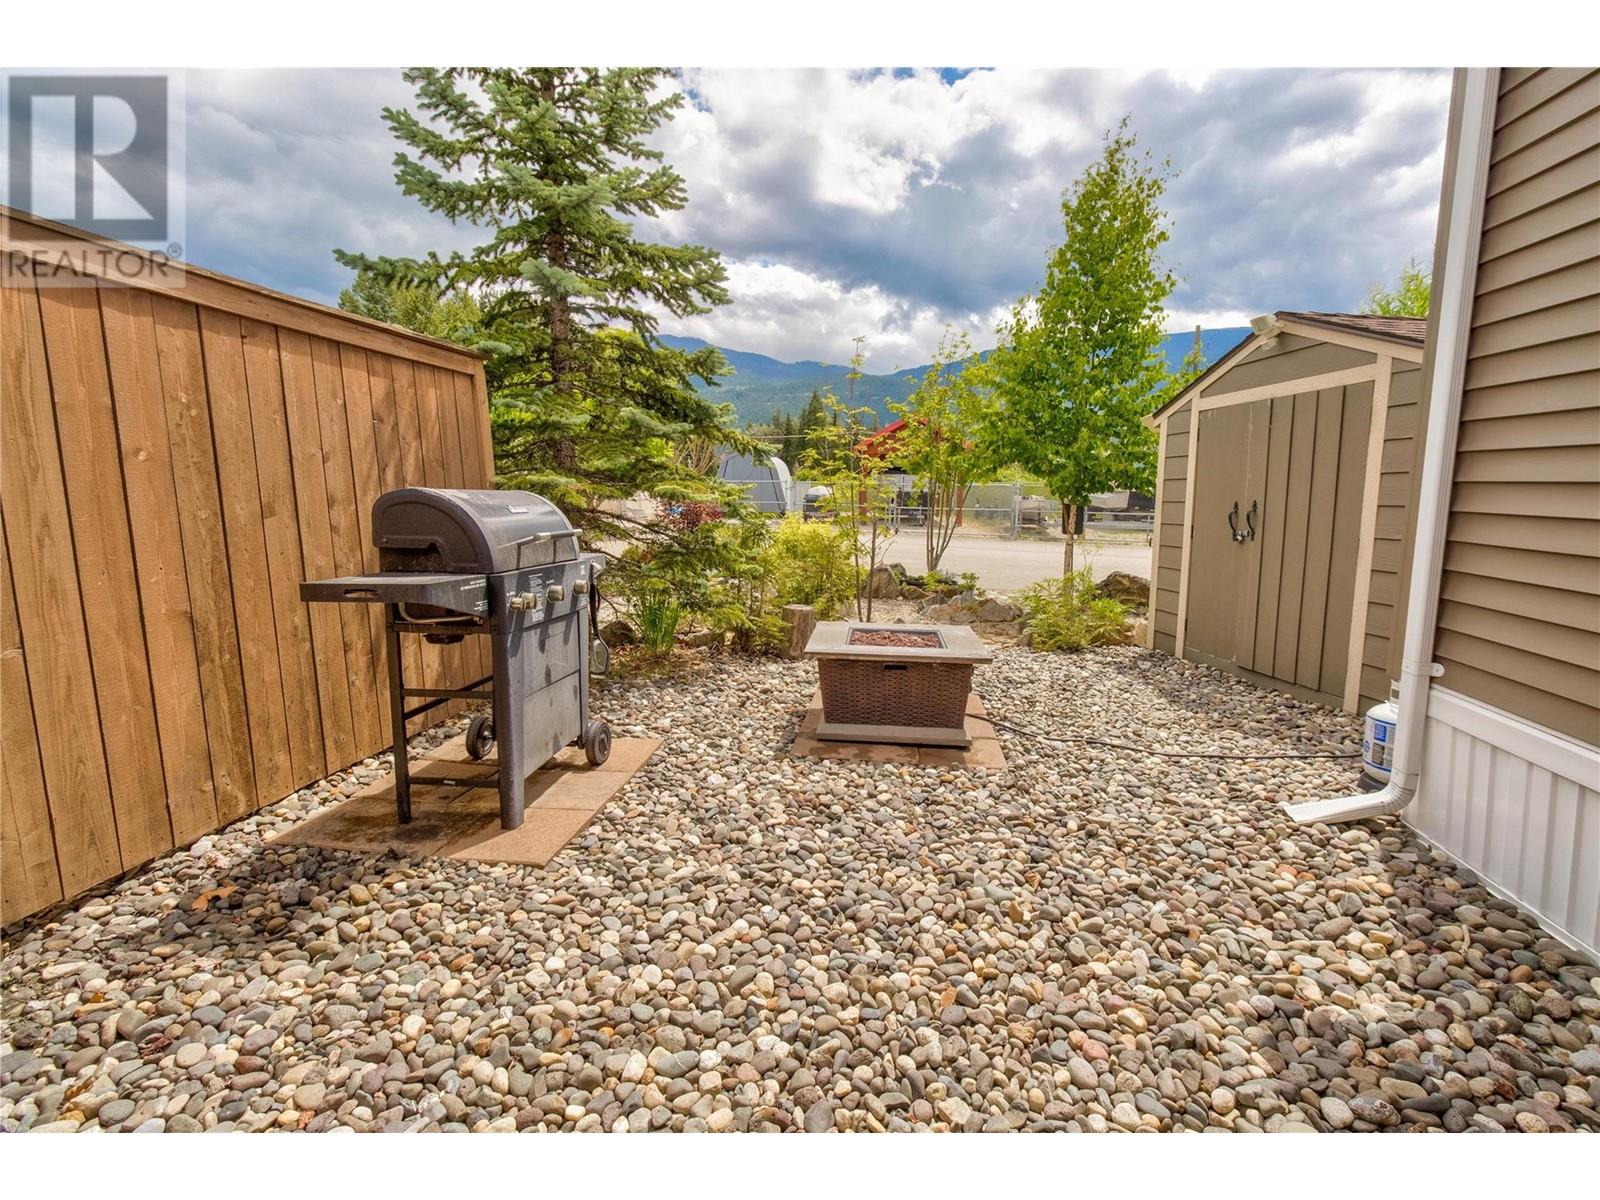 115 1383 Silver Sands Road, Sicamous